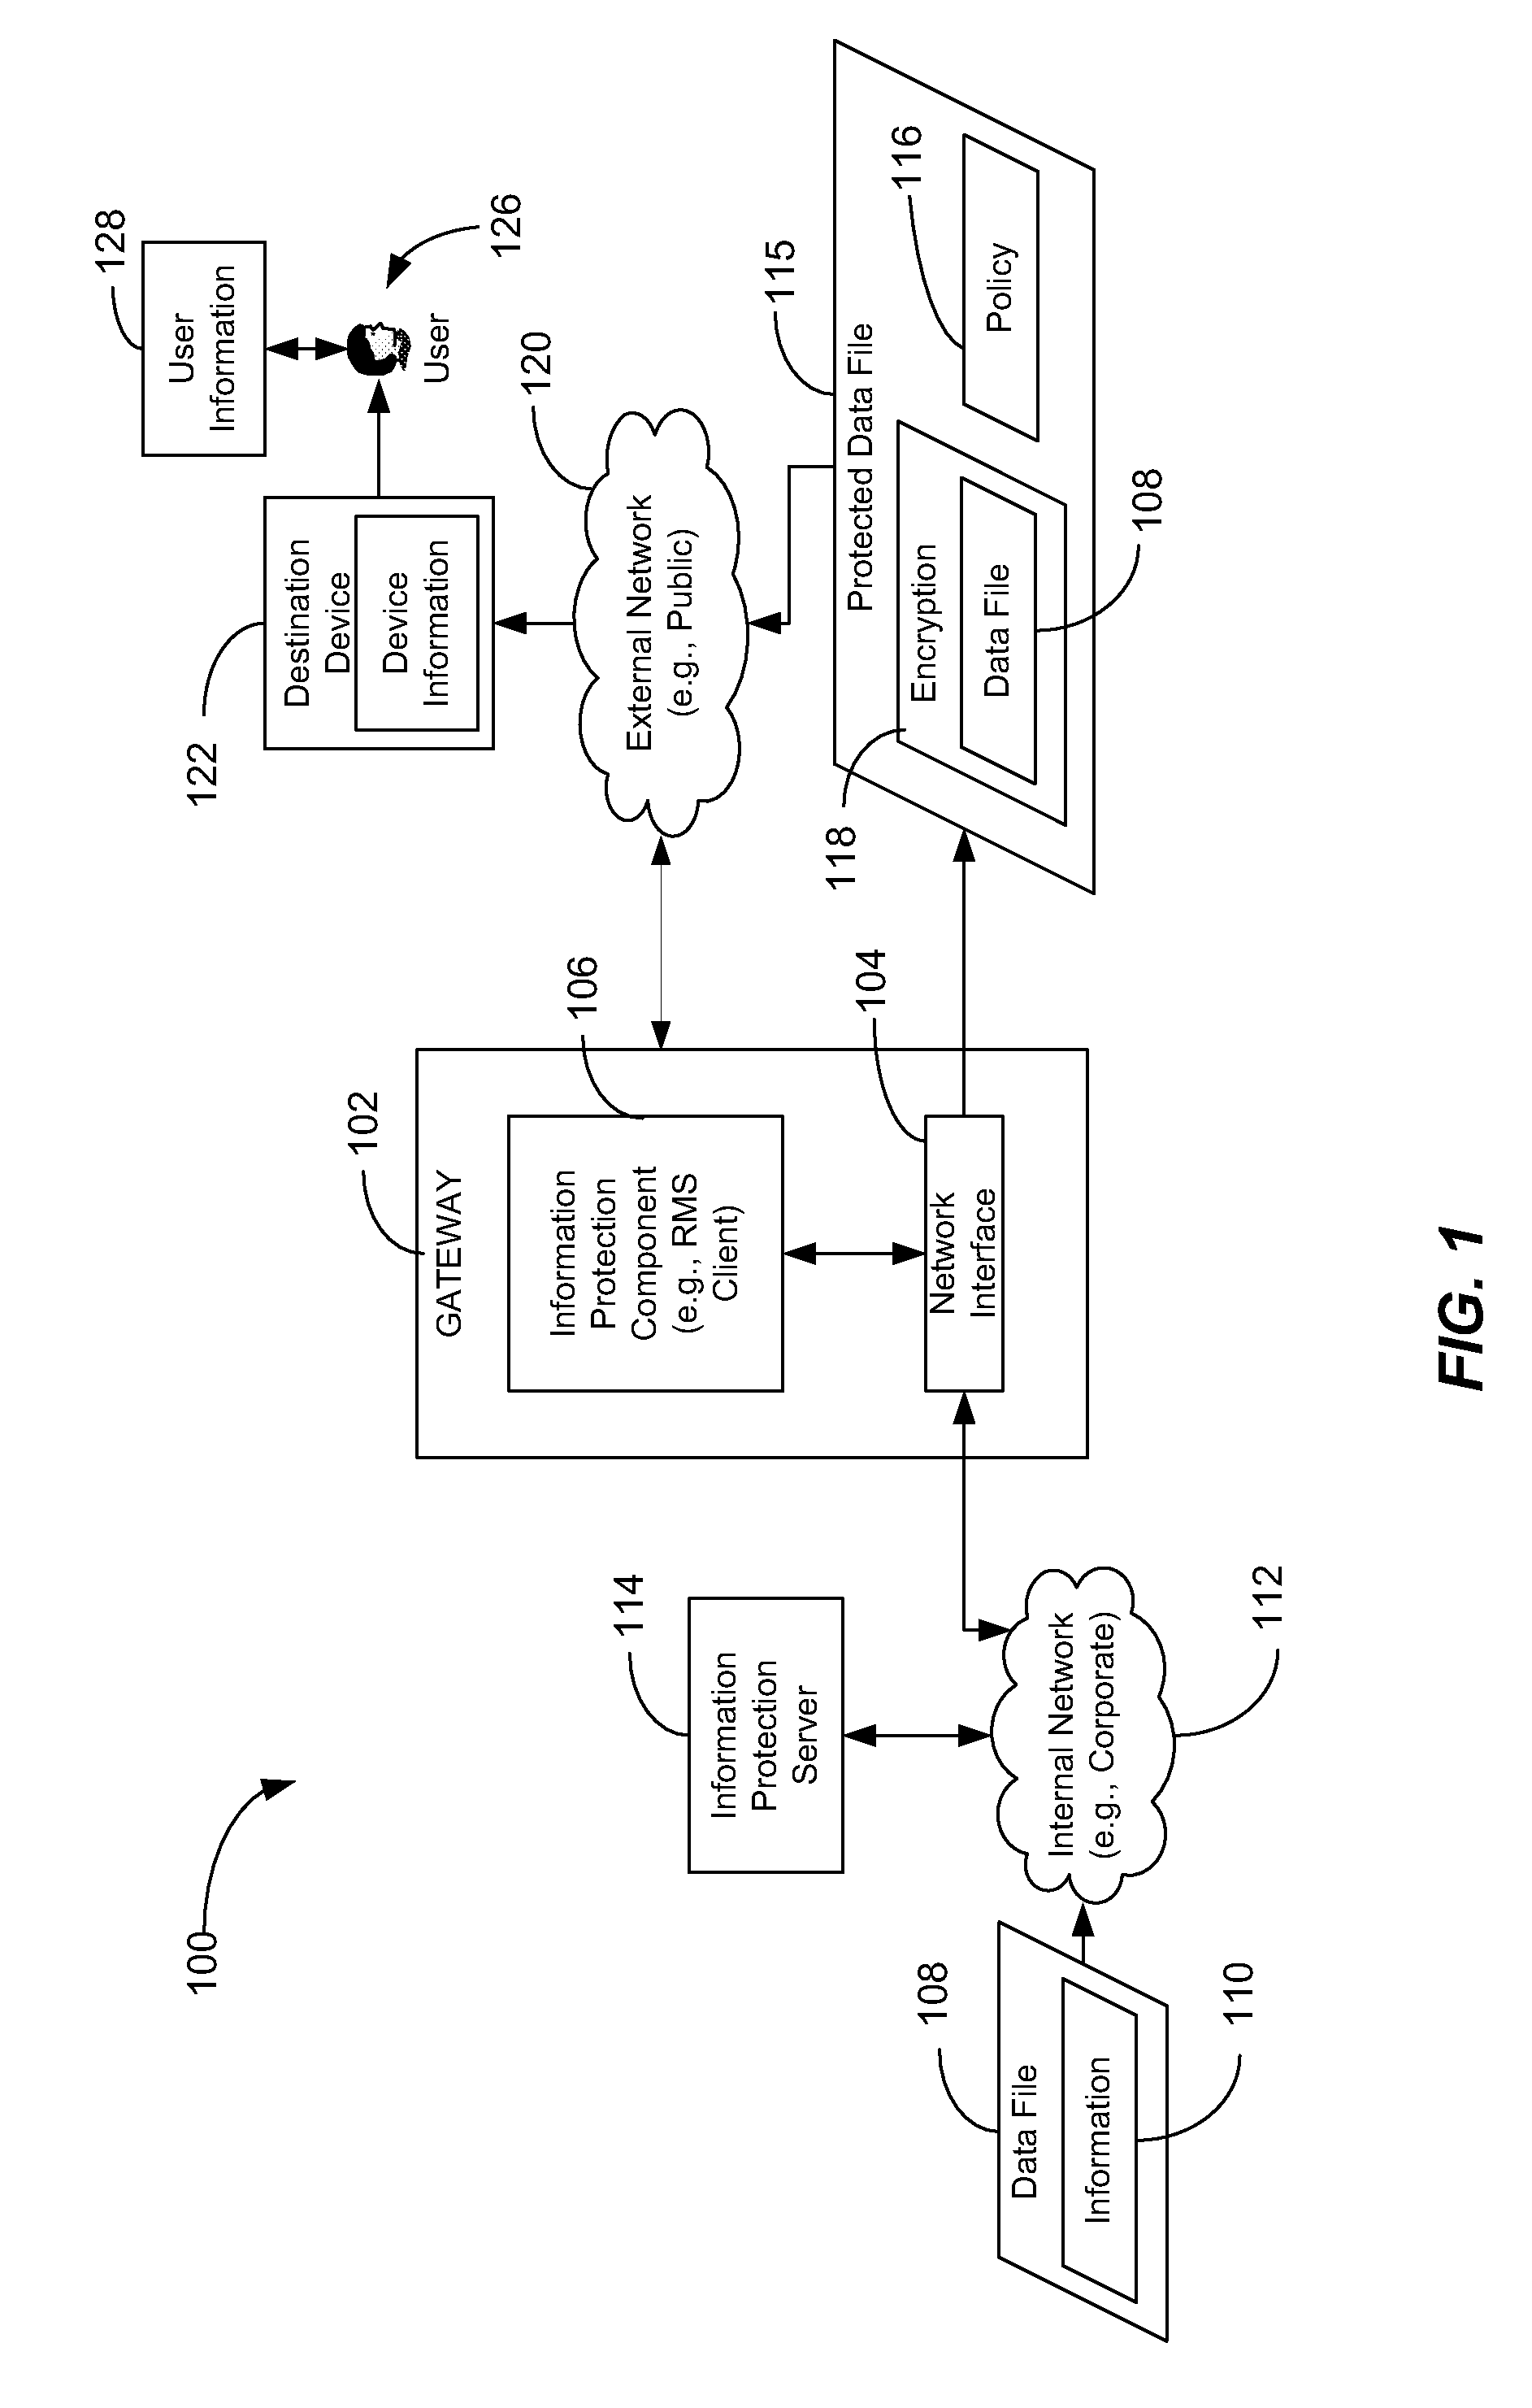 Information protection applied by an intermediary device